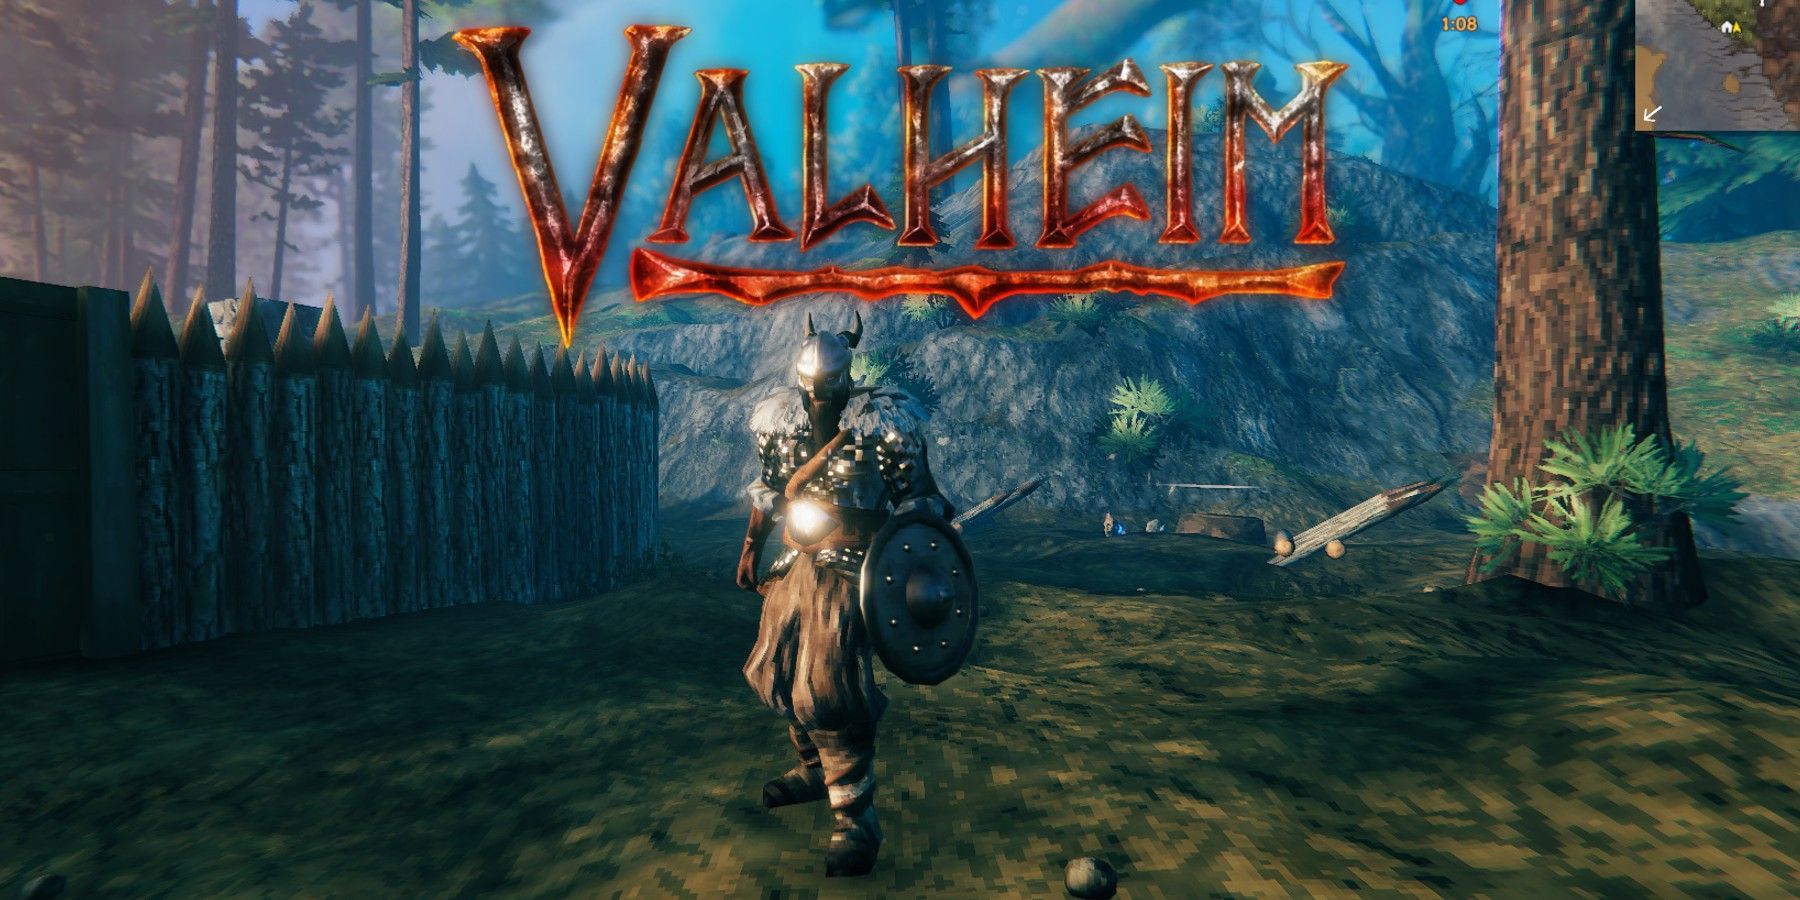 valheim player with a buckler, game title across the top